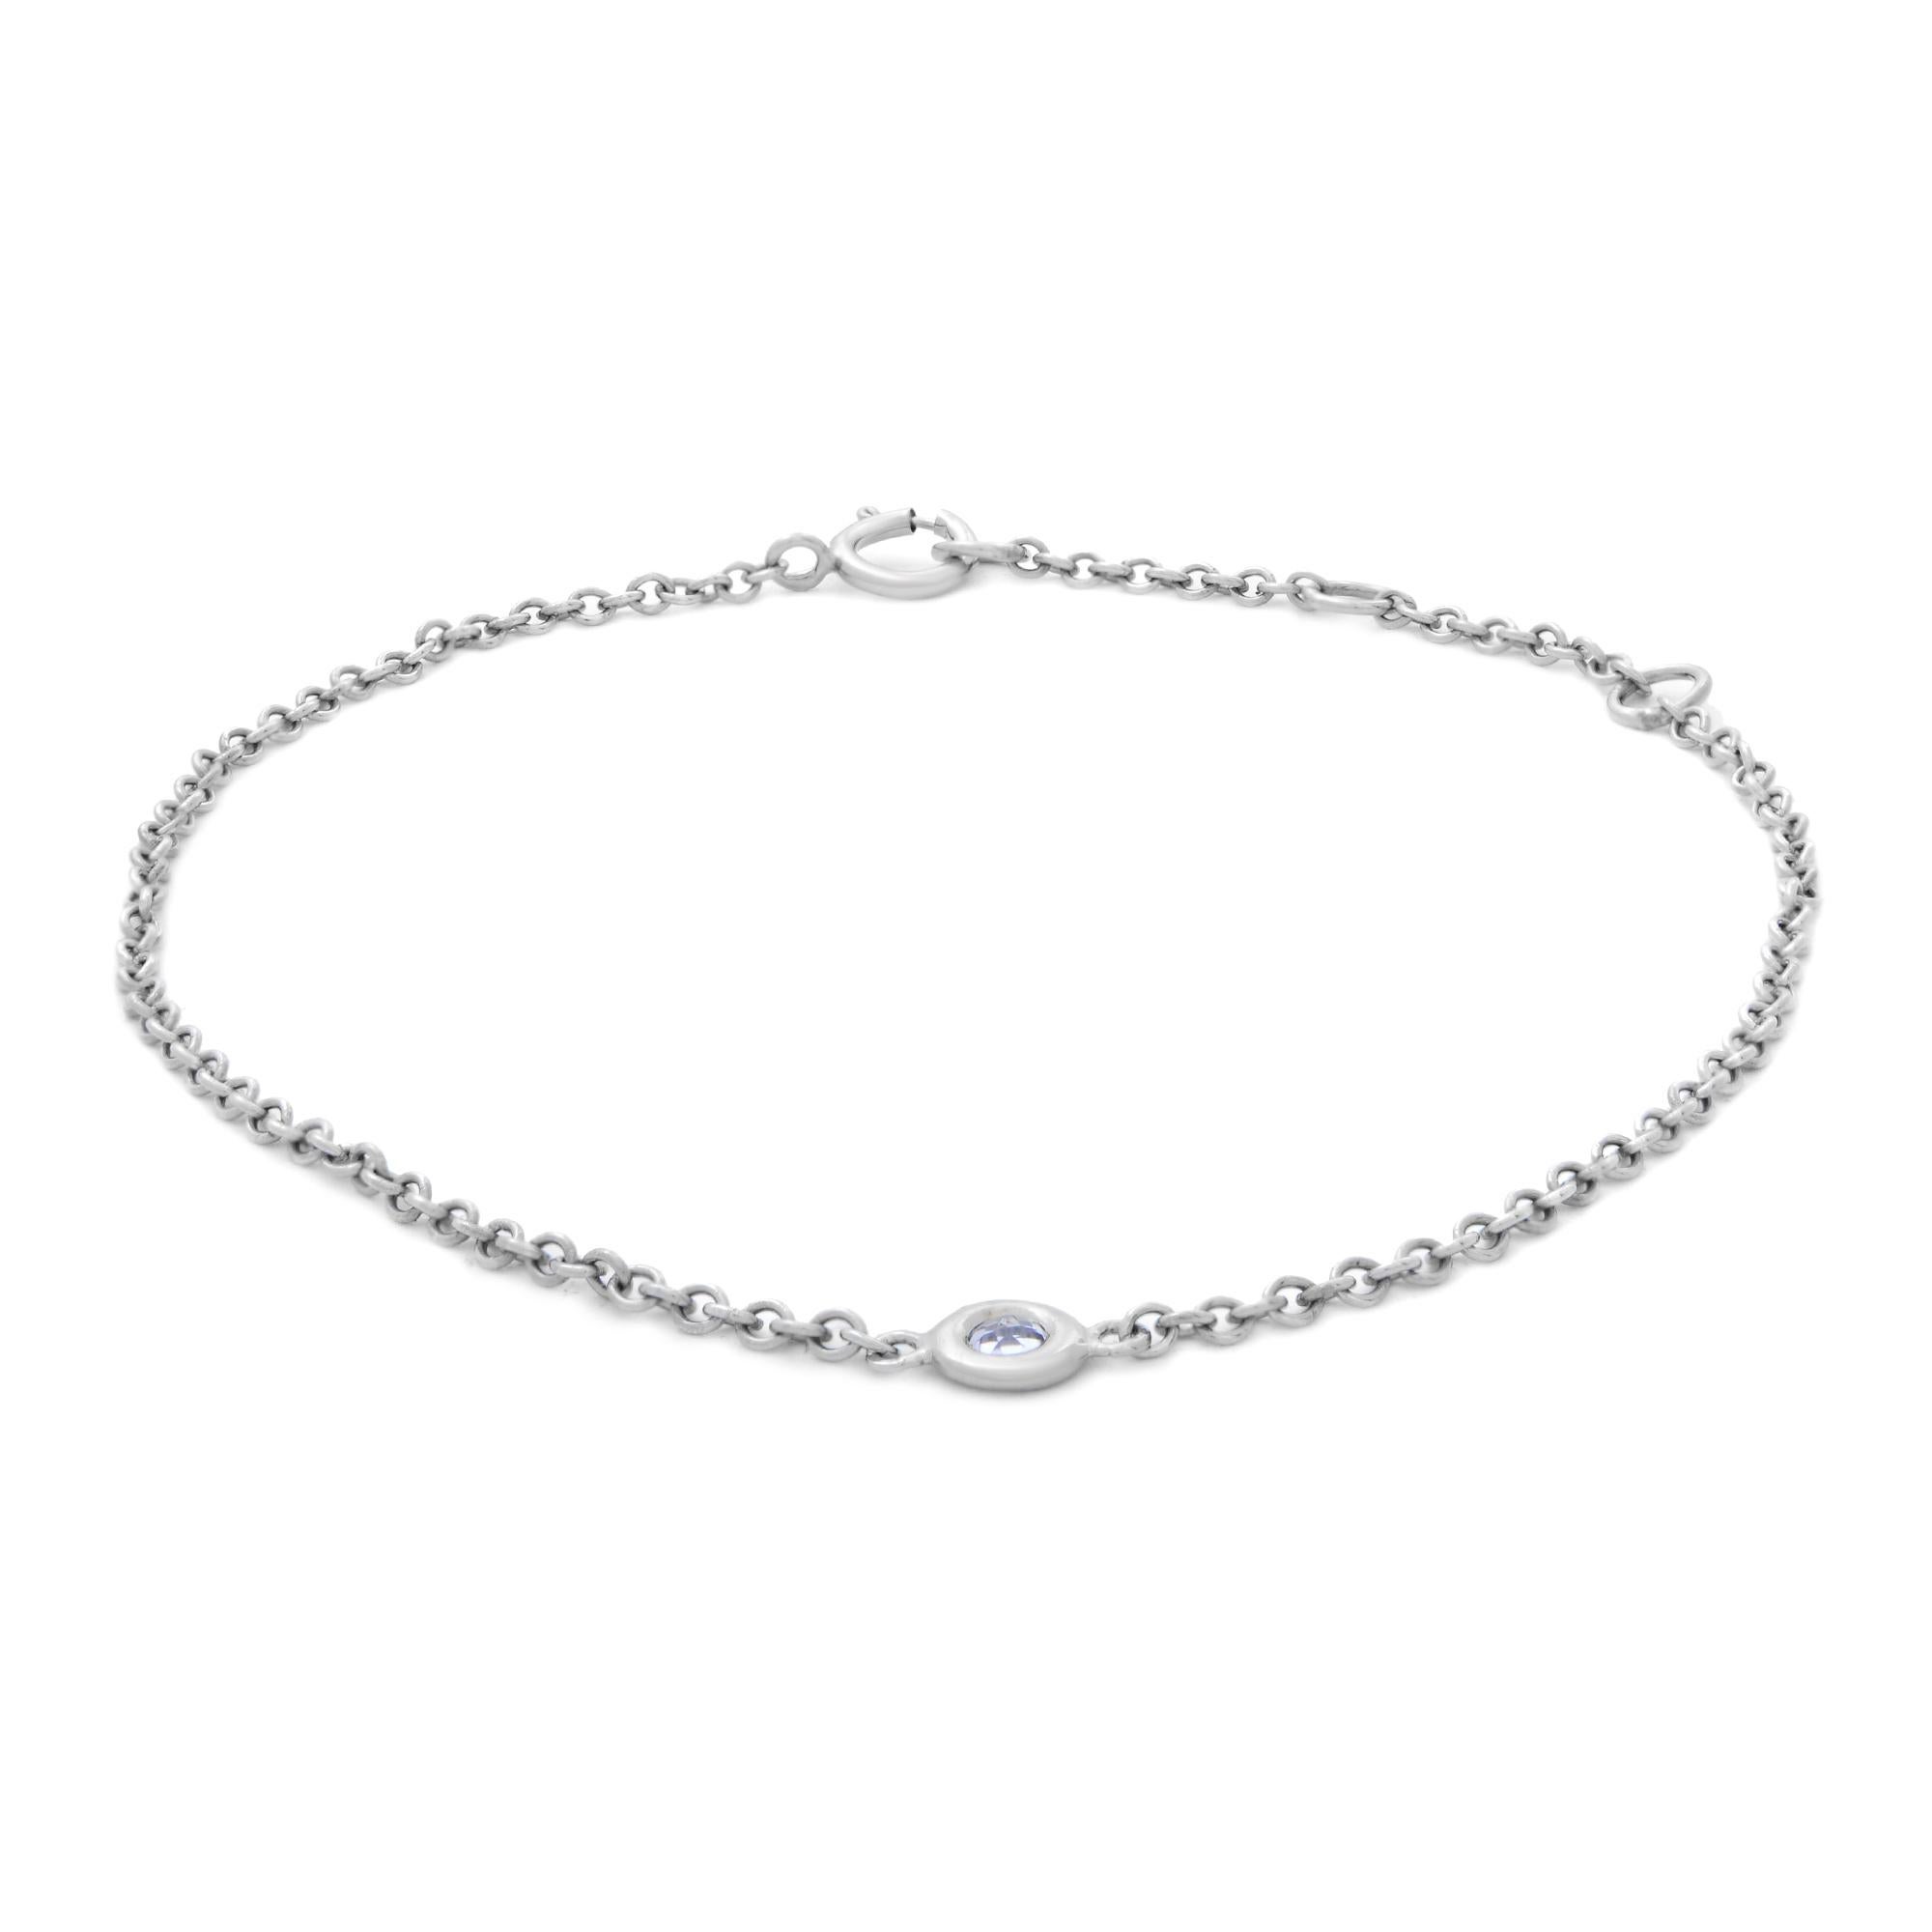 This 14k white gold bracelet features a delicate chain with a bezel set round cut Aquamarine gemstone charm. Tiny 15pt natural Aquamarine. March birthstone. Bracelet length: adjustable from 6.25-7.25 inches. We used the finest quality materials with